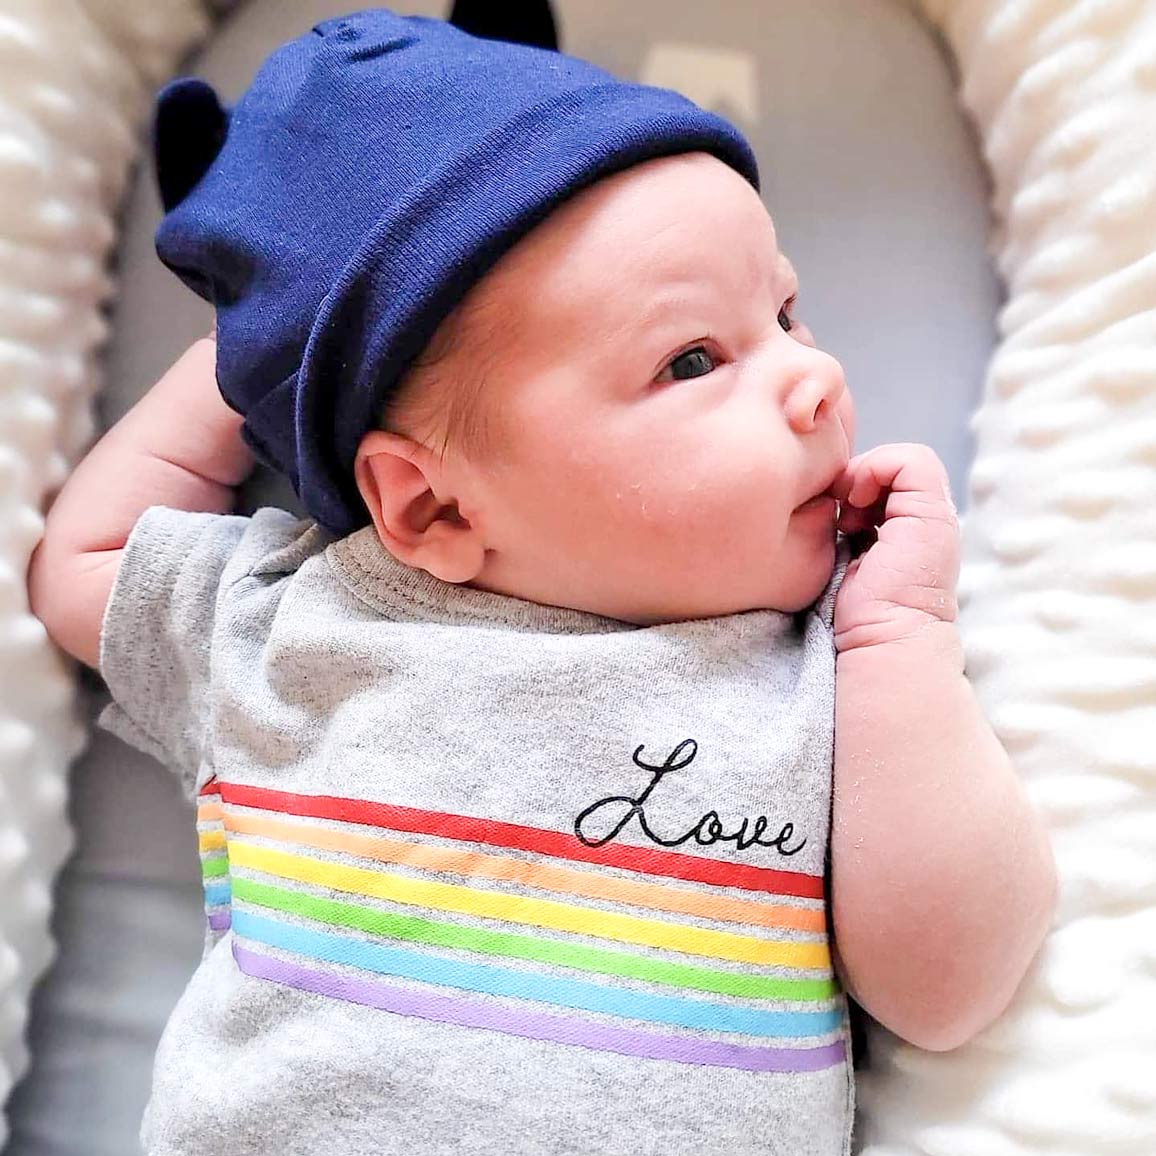 Baby boy in blue beanie hat and gray shirt with rainbow that says "love" looks up and to the right in his baby bed.